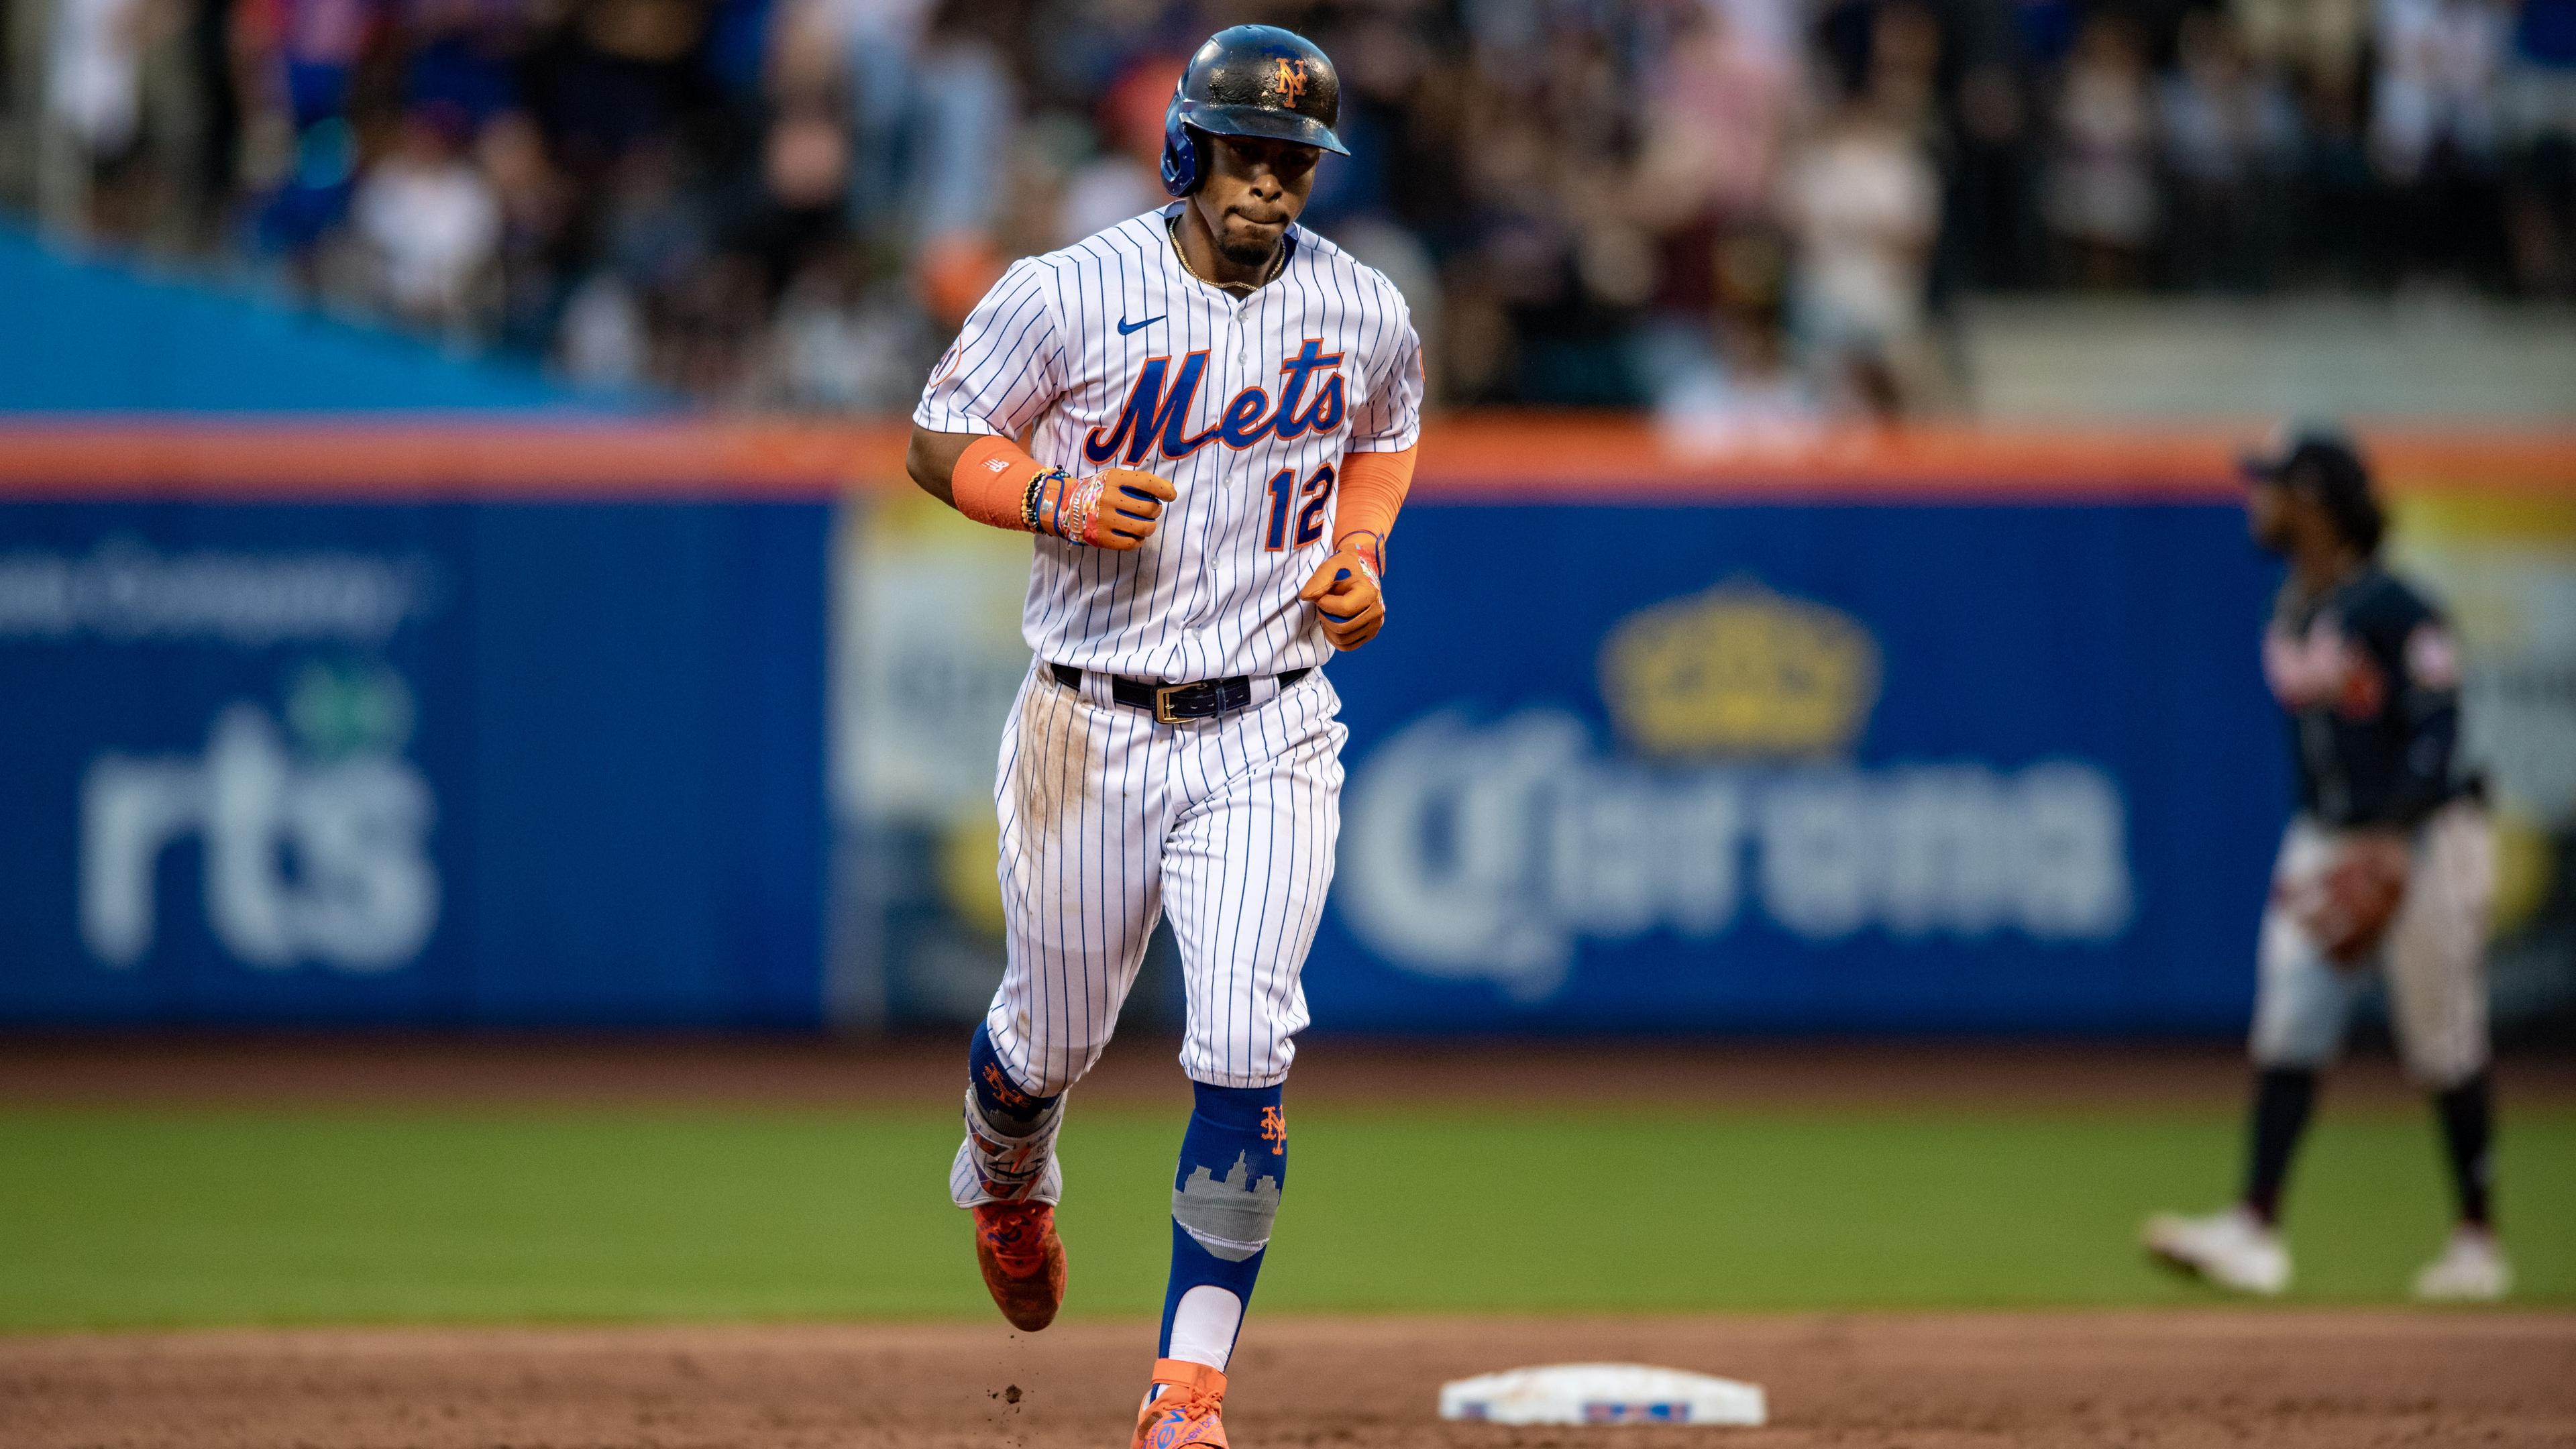 Jun 23, 2021; New York City, New York, USA; New York Mets shortstop Francisco Lindor (12) rounds the bases after hitting a two run home run against the Atlanta Braves during the second inning at Citi Field. / John Jones-USA TODAY Sports